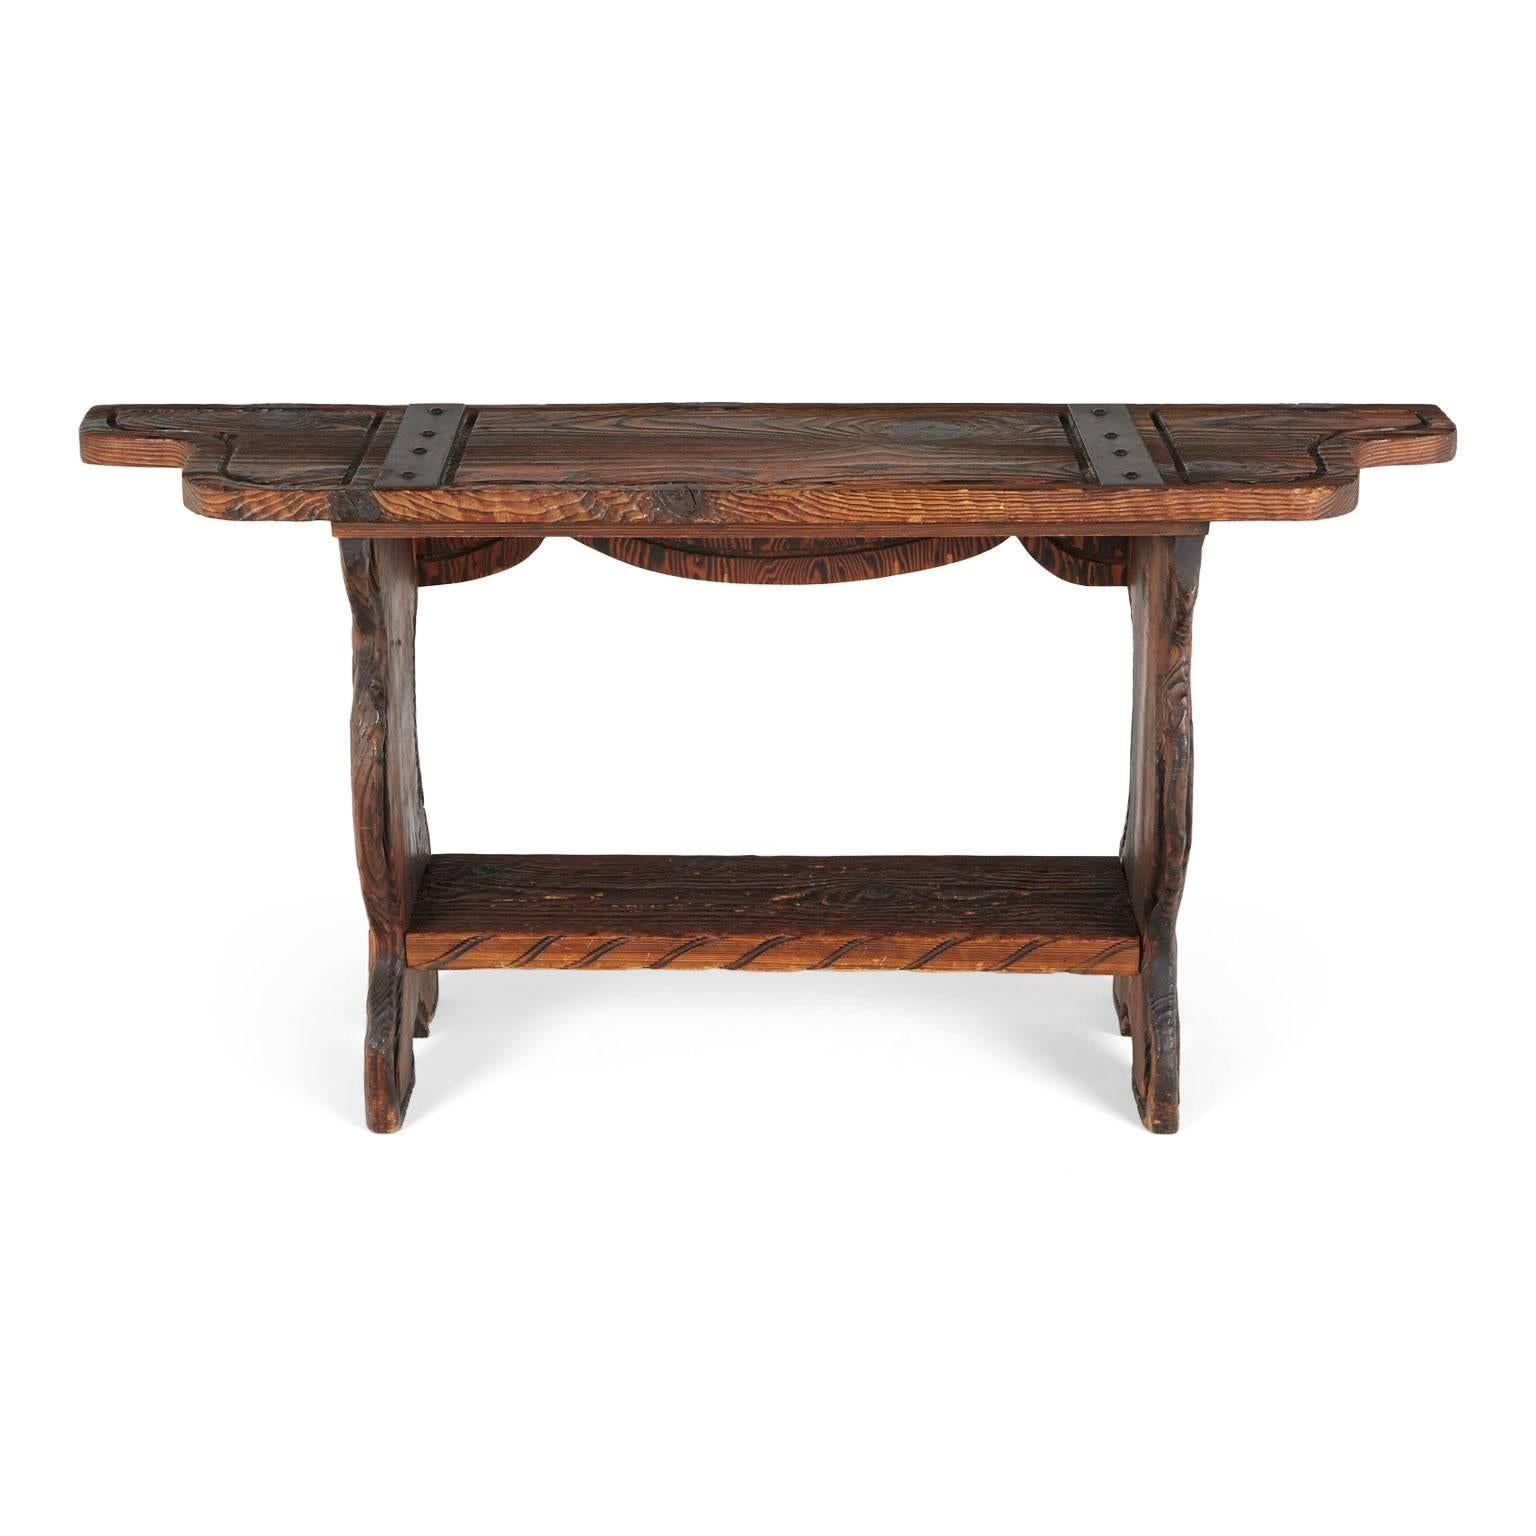 This ornately crafted red walnut console with carved exotic details is a testament to William Westenhaver's Modern Primitive creations. Influenced by Polynesian natives sculpting their ancestral deities in to wood furnishings, Westenhaver fused his